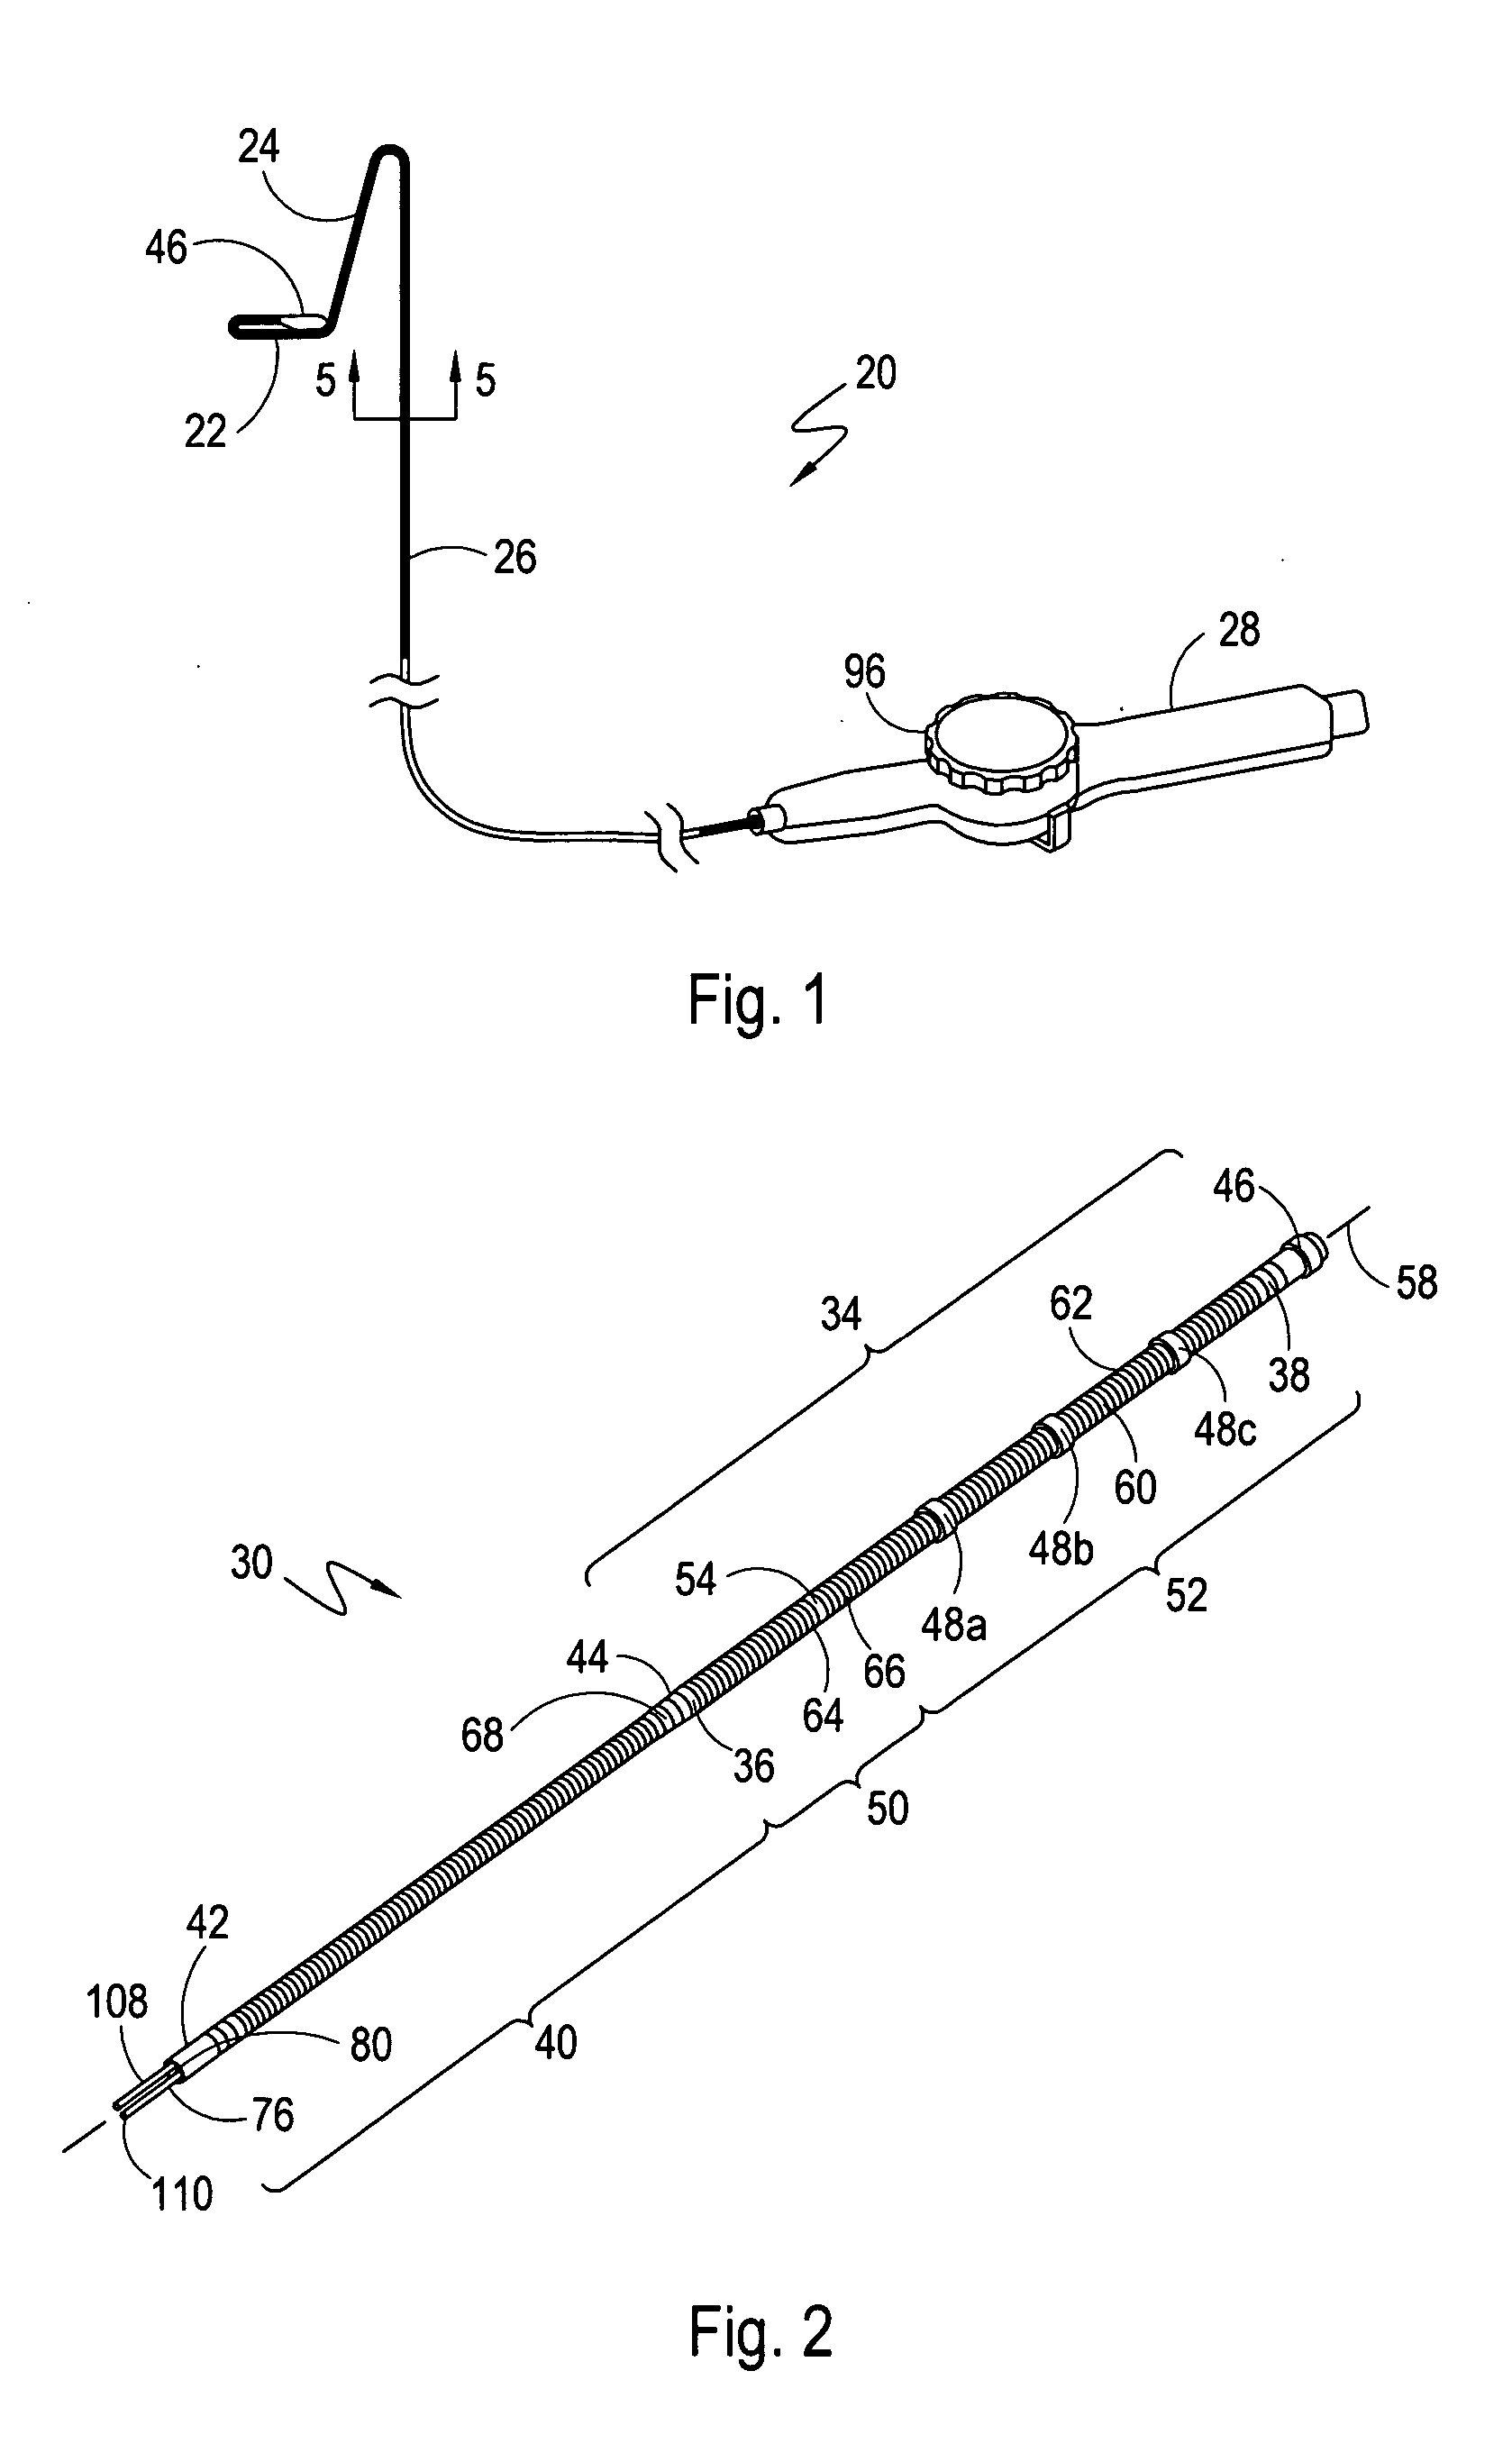 System for bi-directionally controlling the cryo-tip of a cryoablation catheter